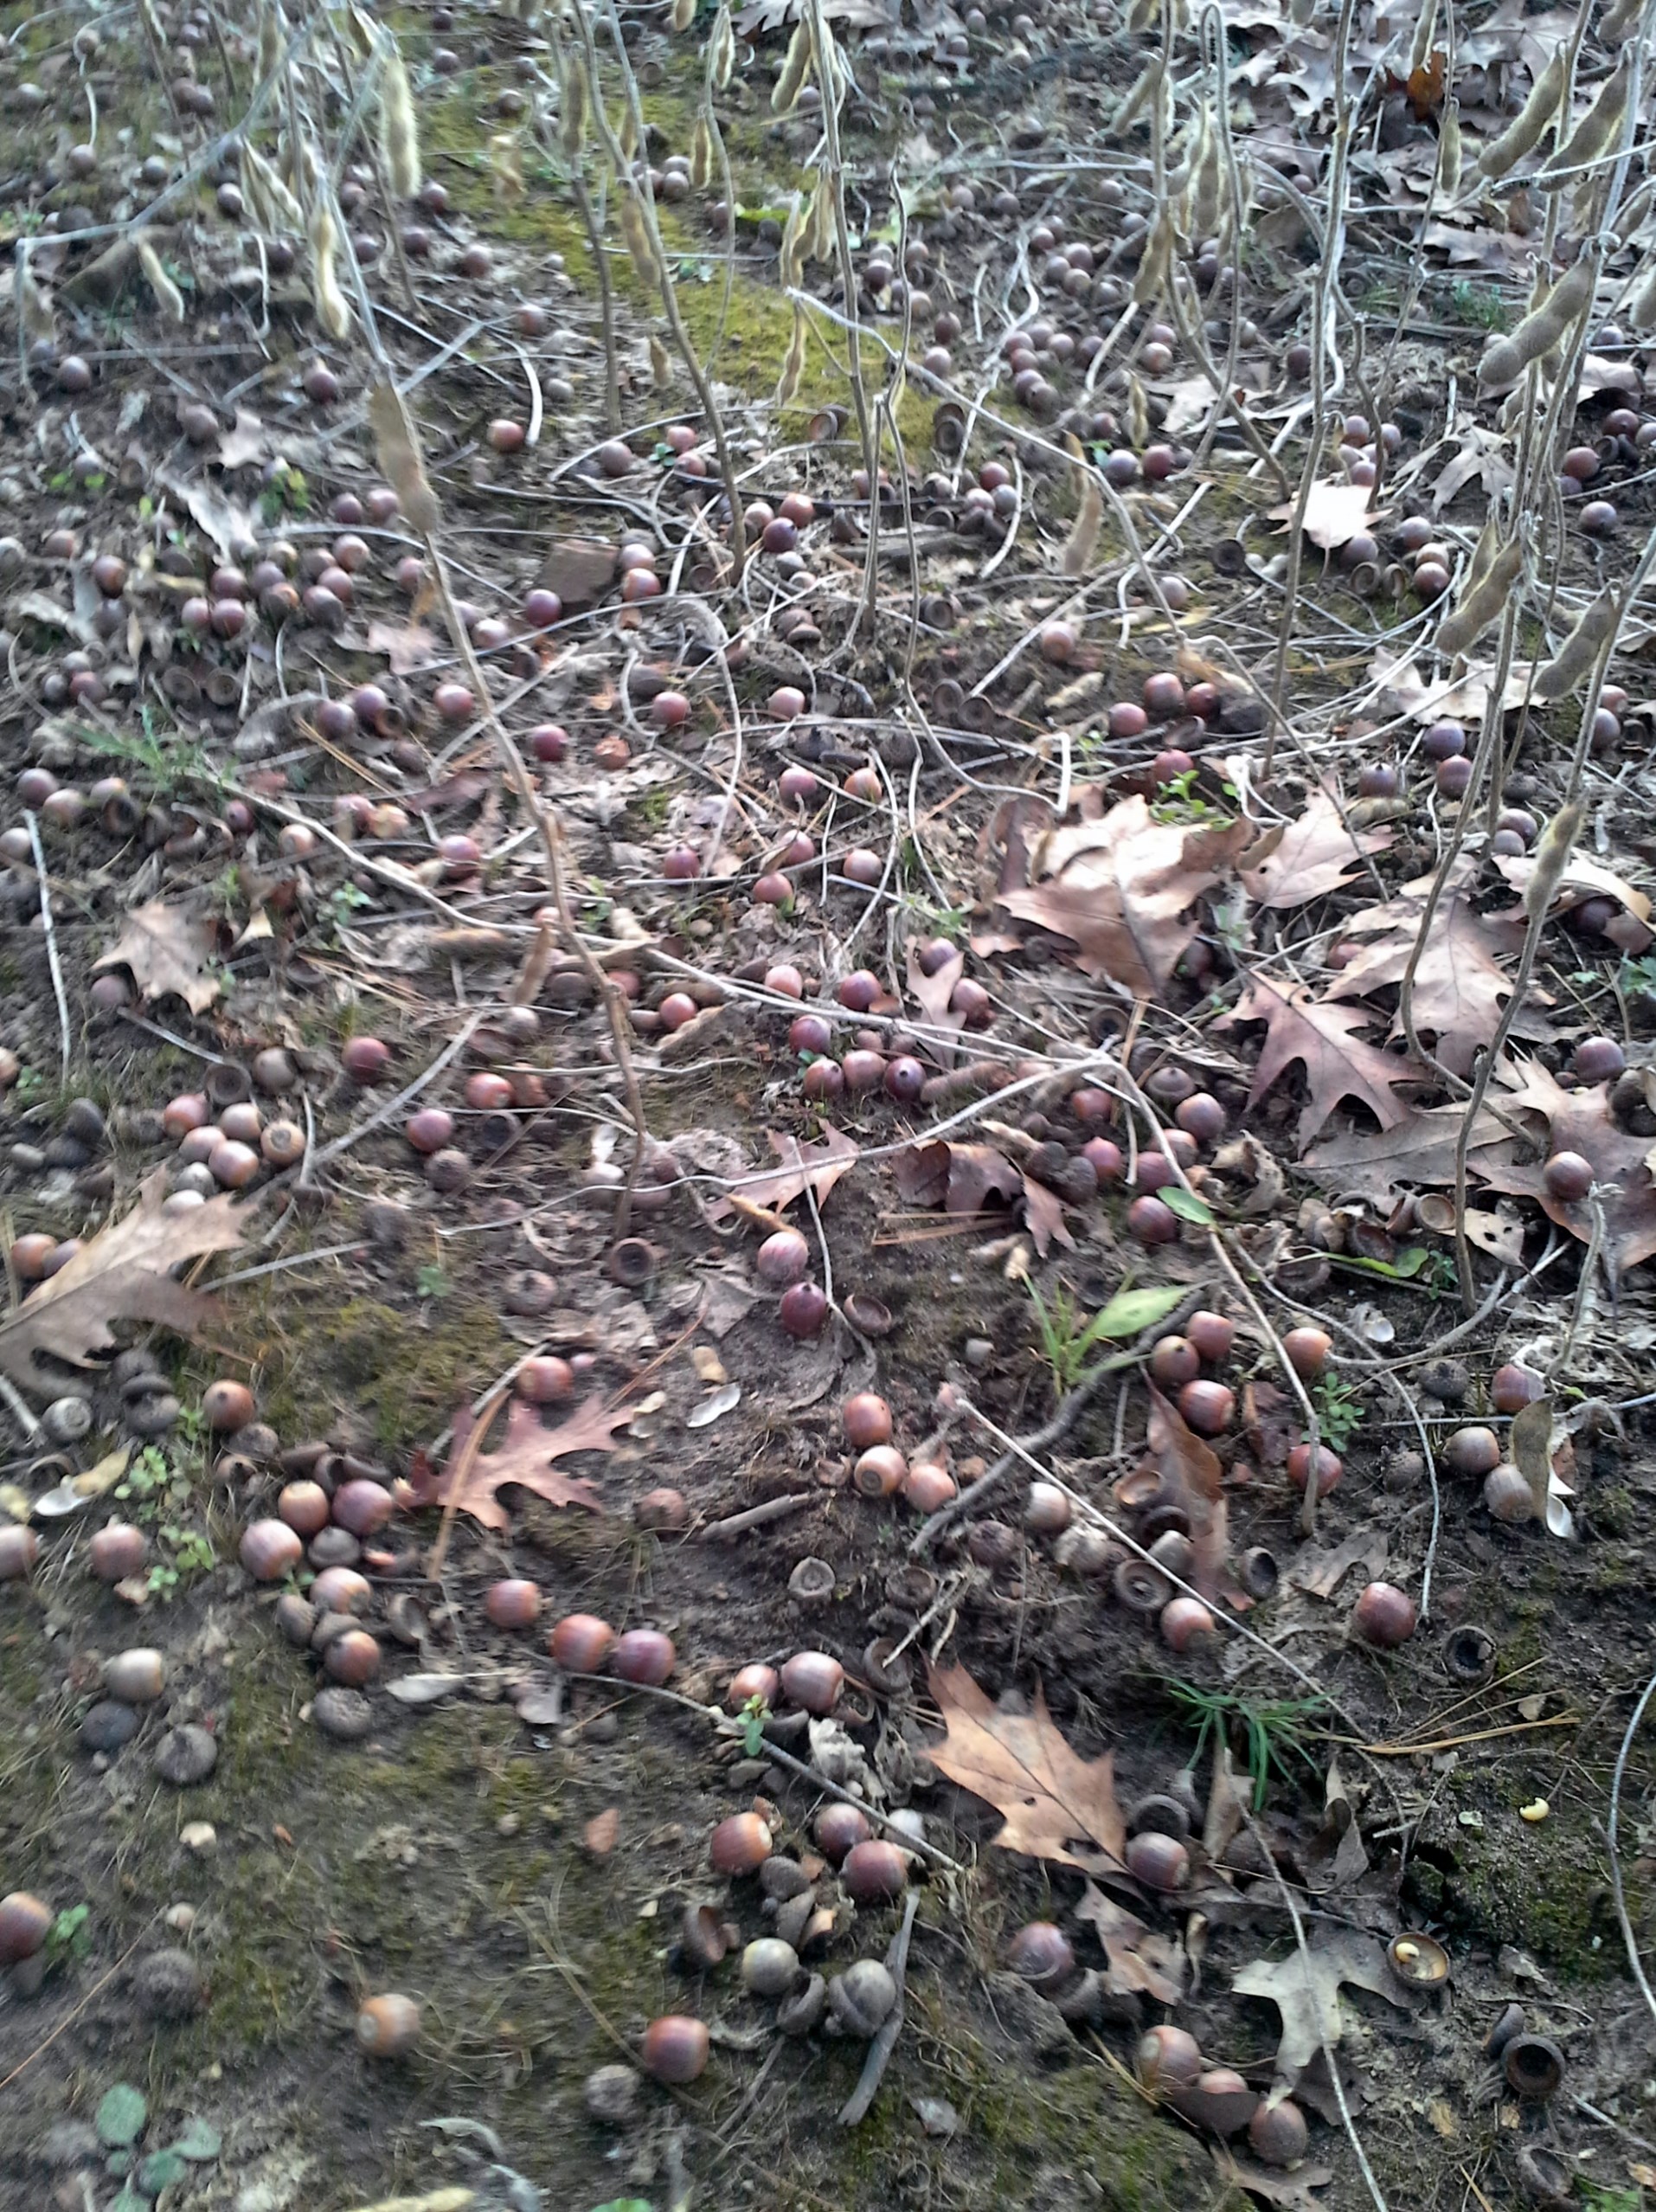 2015 was the year of the acorn across much of Iowa. By mid-November and these red oak acorns are still thick as can be. Adapting to hot food sources might require in season adjustments...or as in 2015, maybe not.